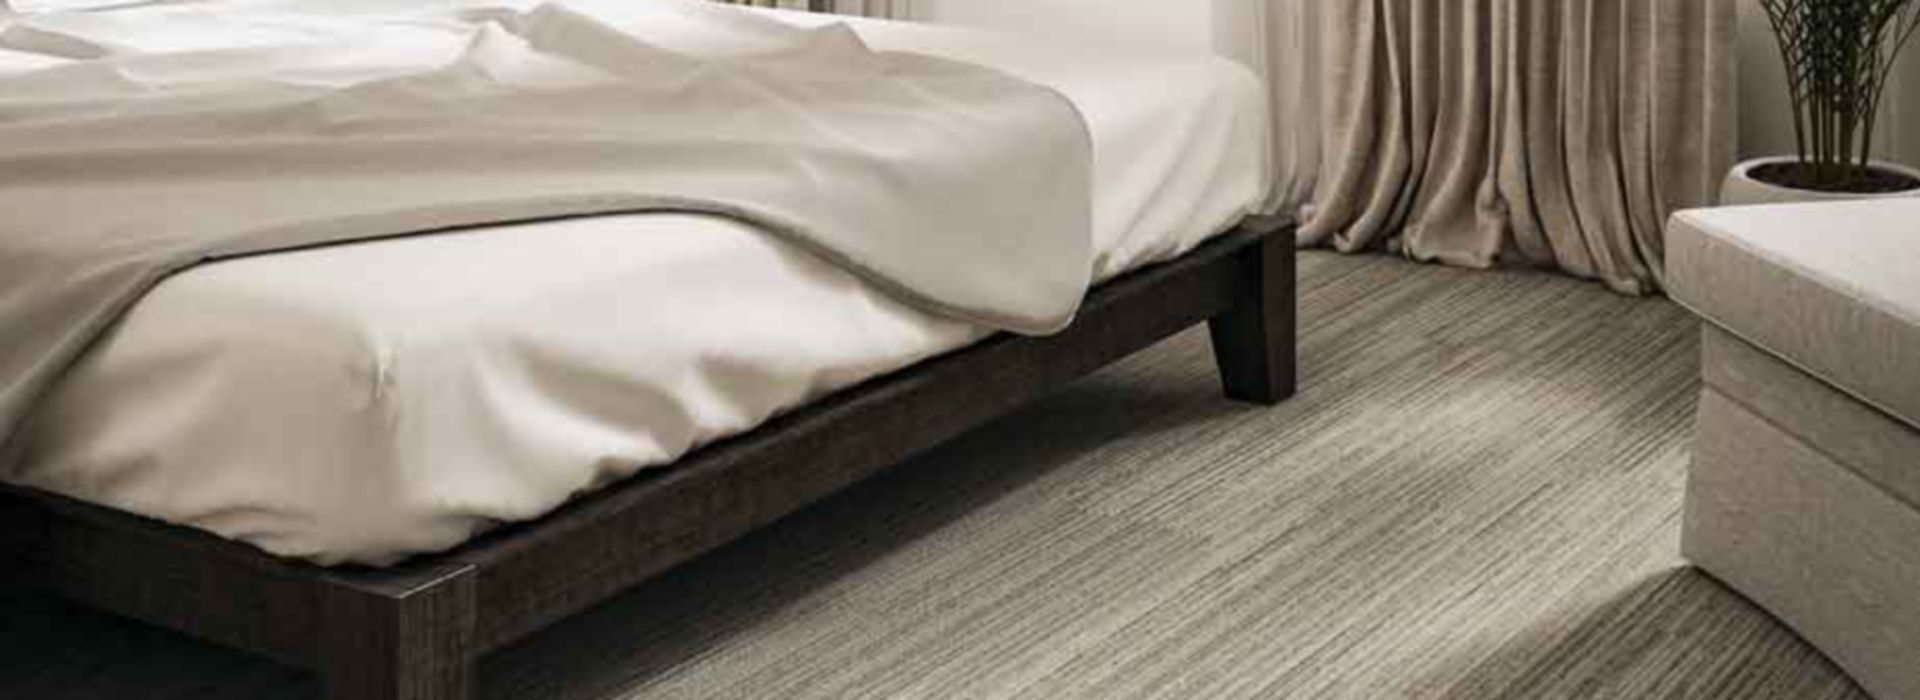 Interface SWTS 110 plank carpet tile in hotel guest room image number 1